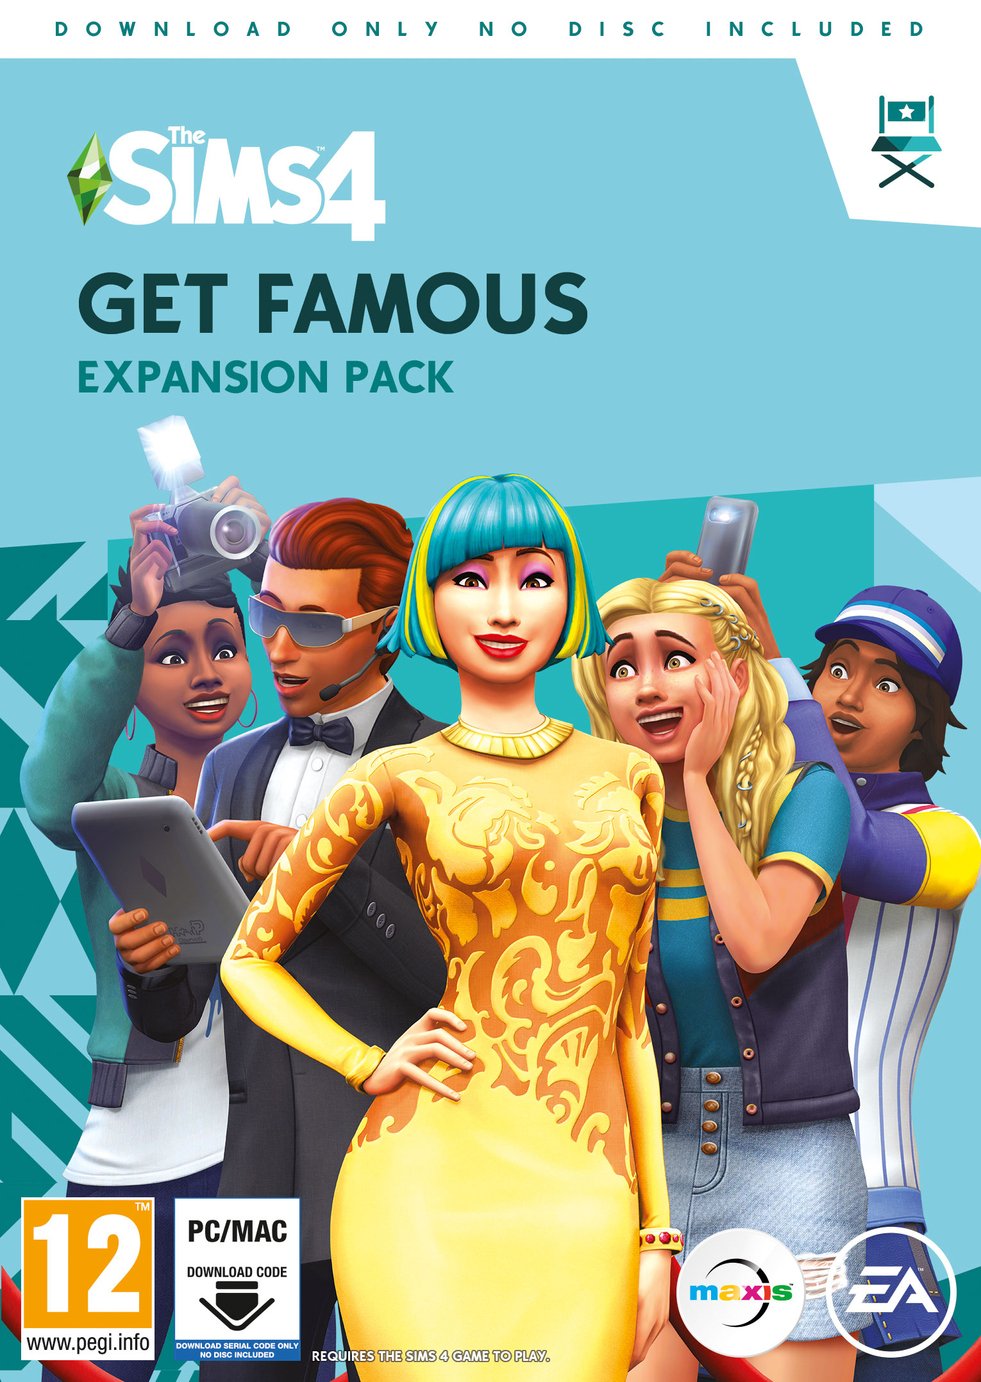 The Sims 4: Get Famous Expansion PC Game Review